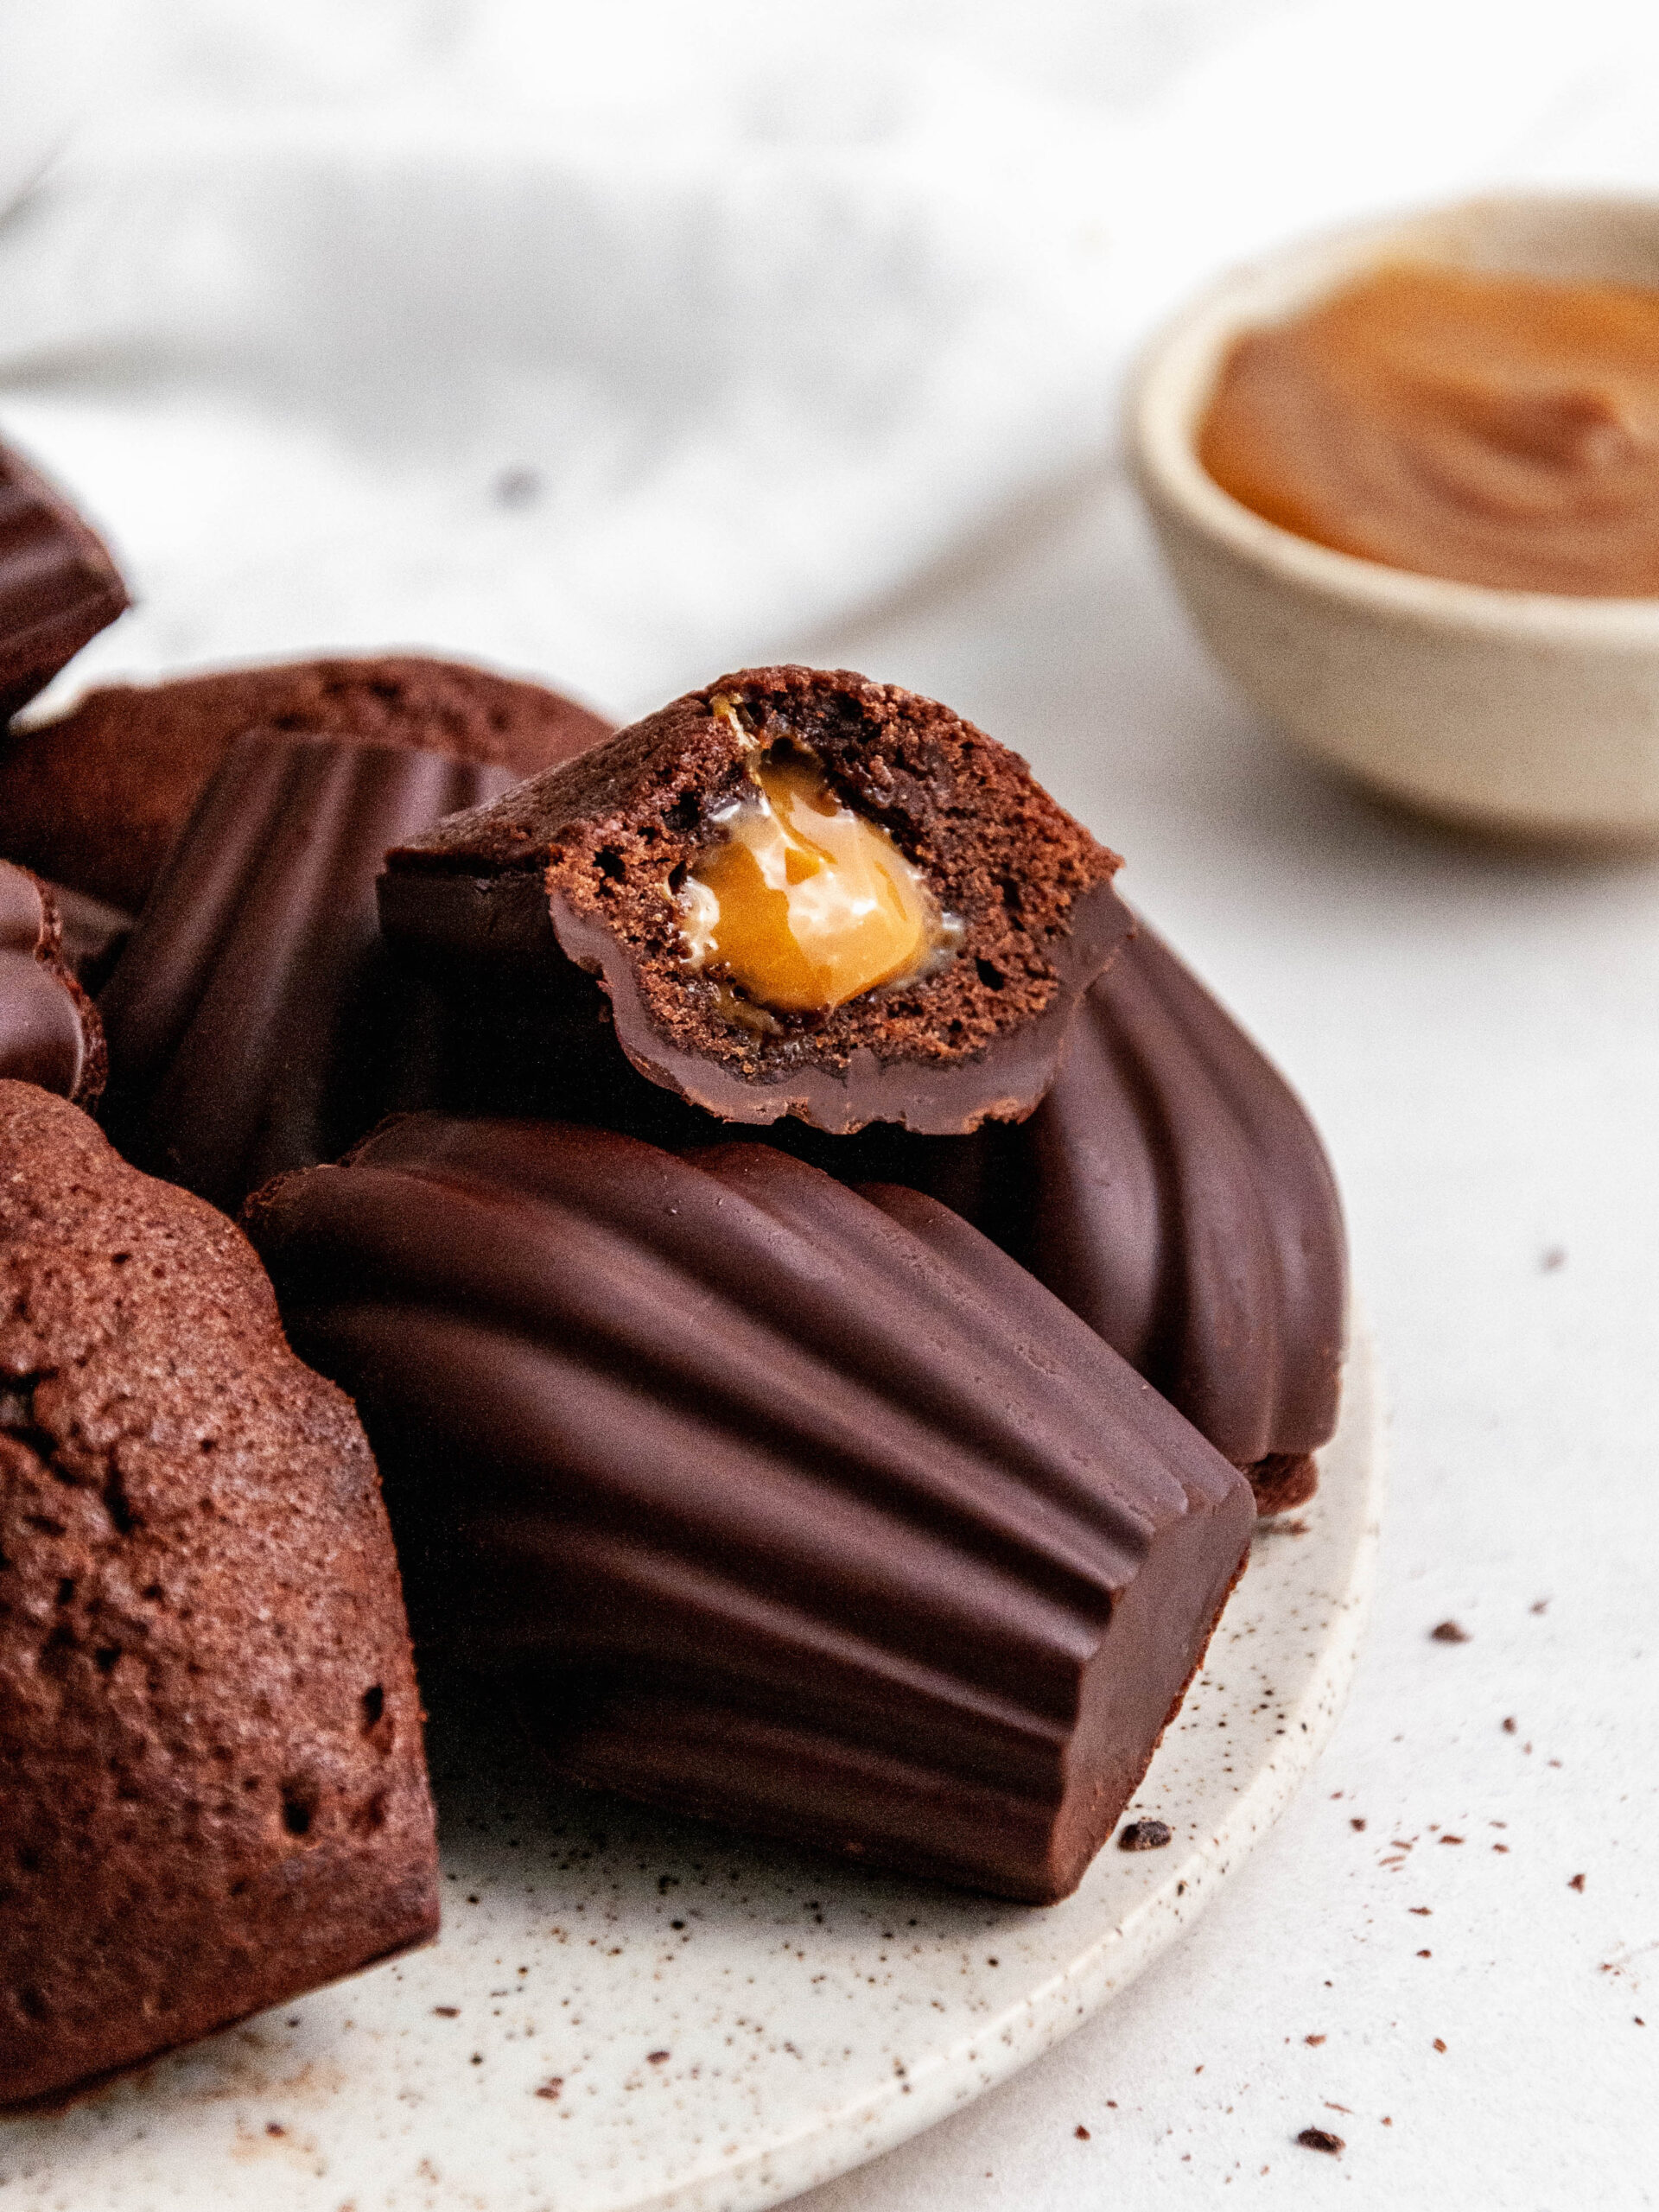 Chocolate madeleines with Dulce de Leche cut in half.